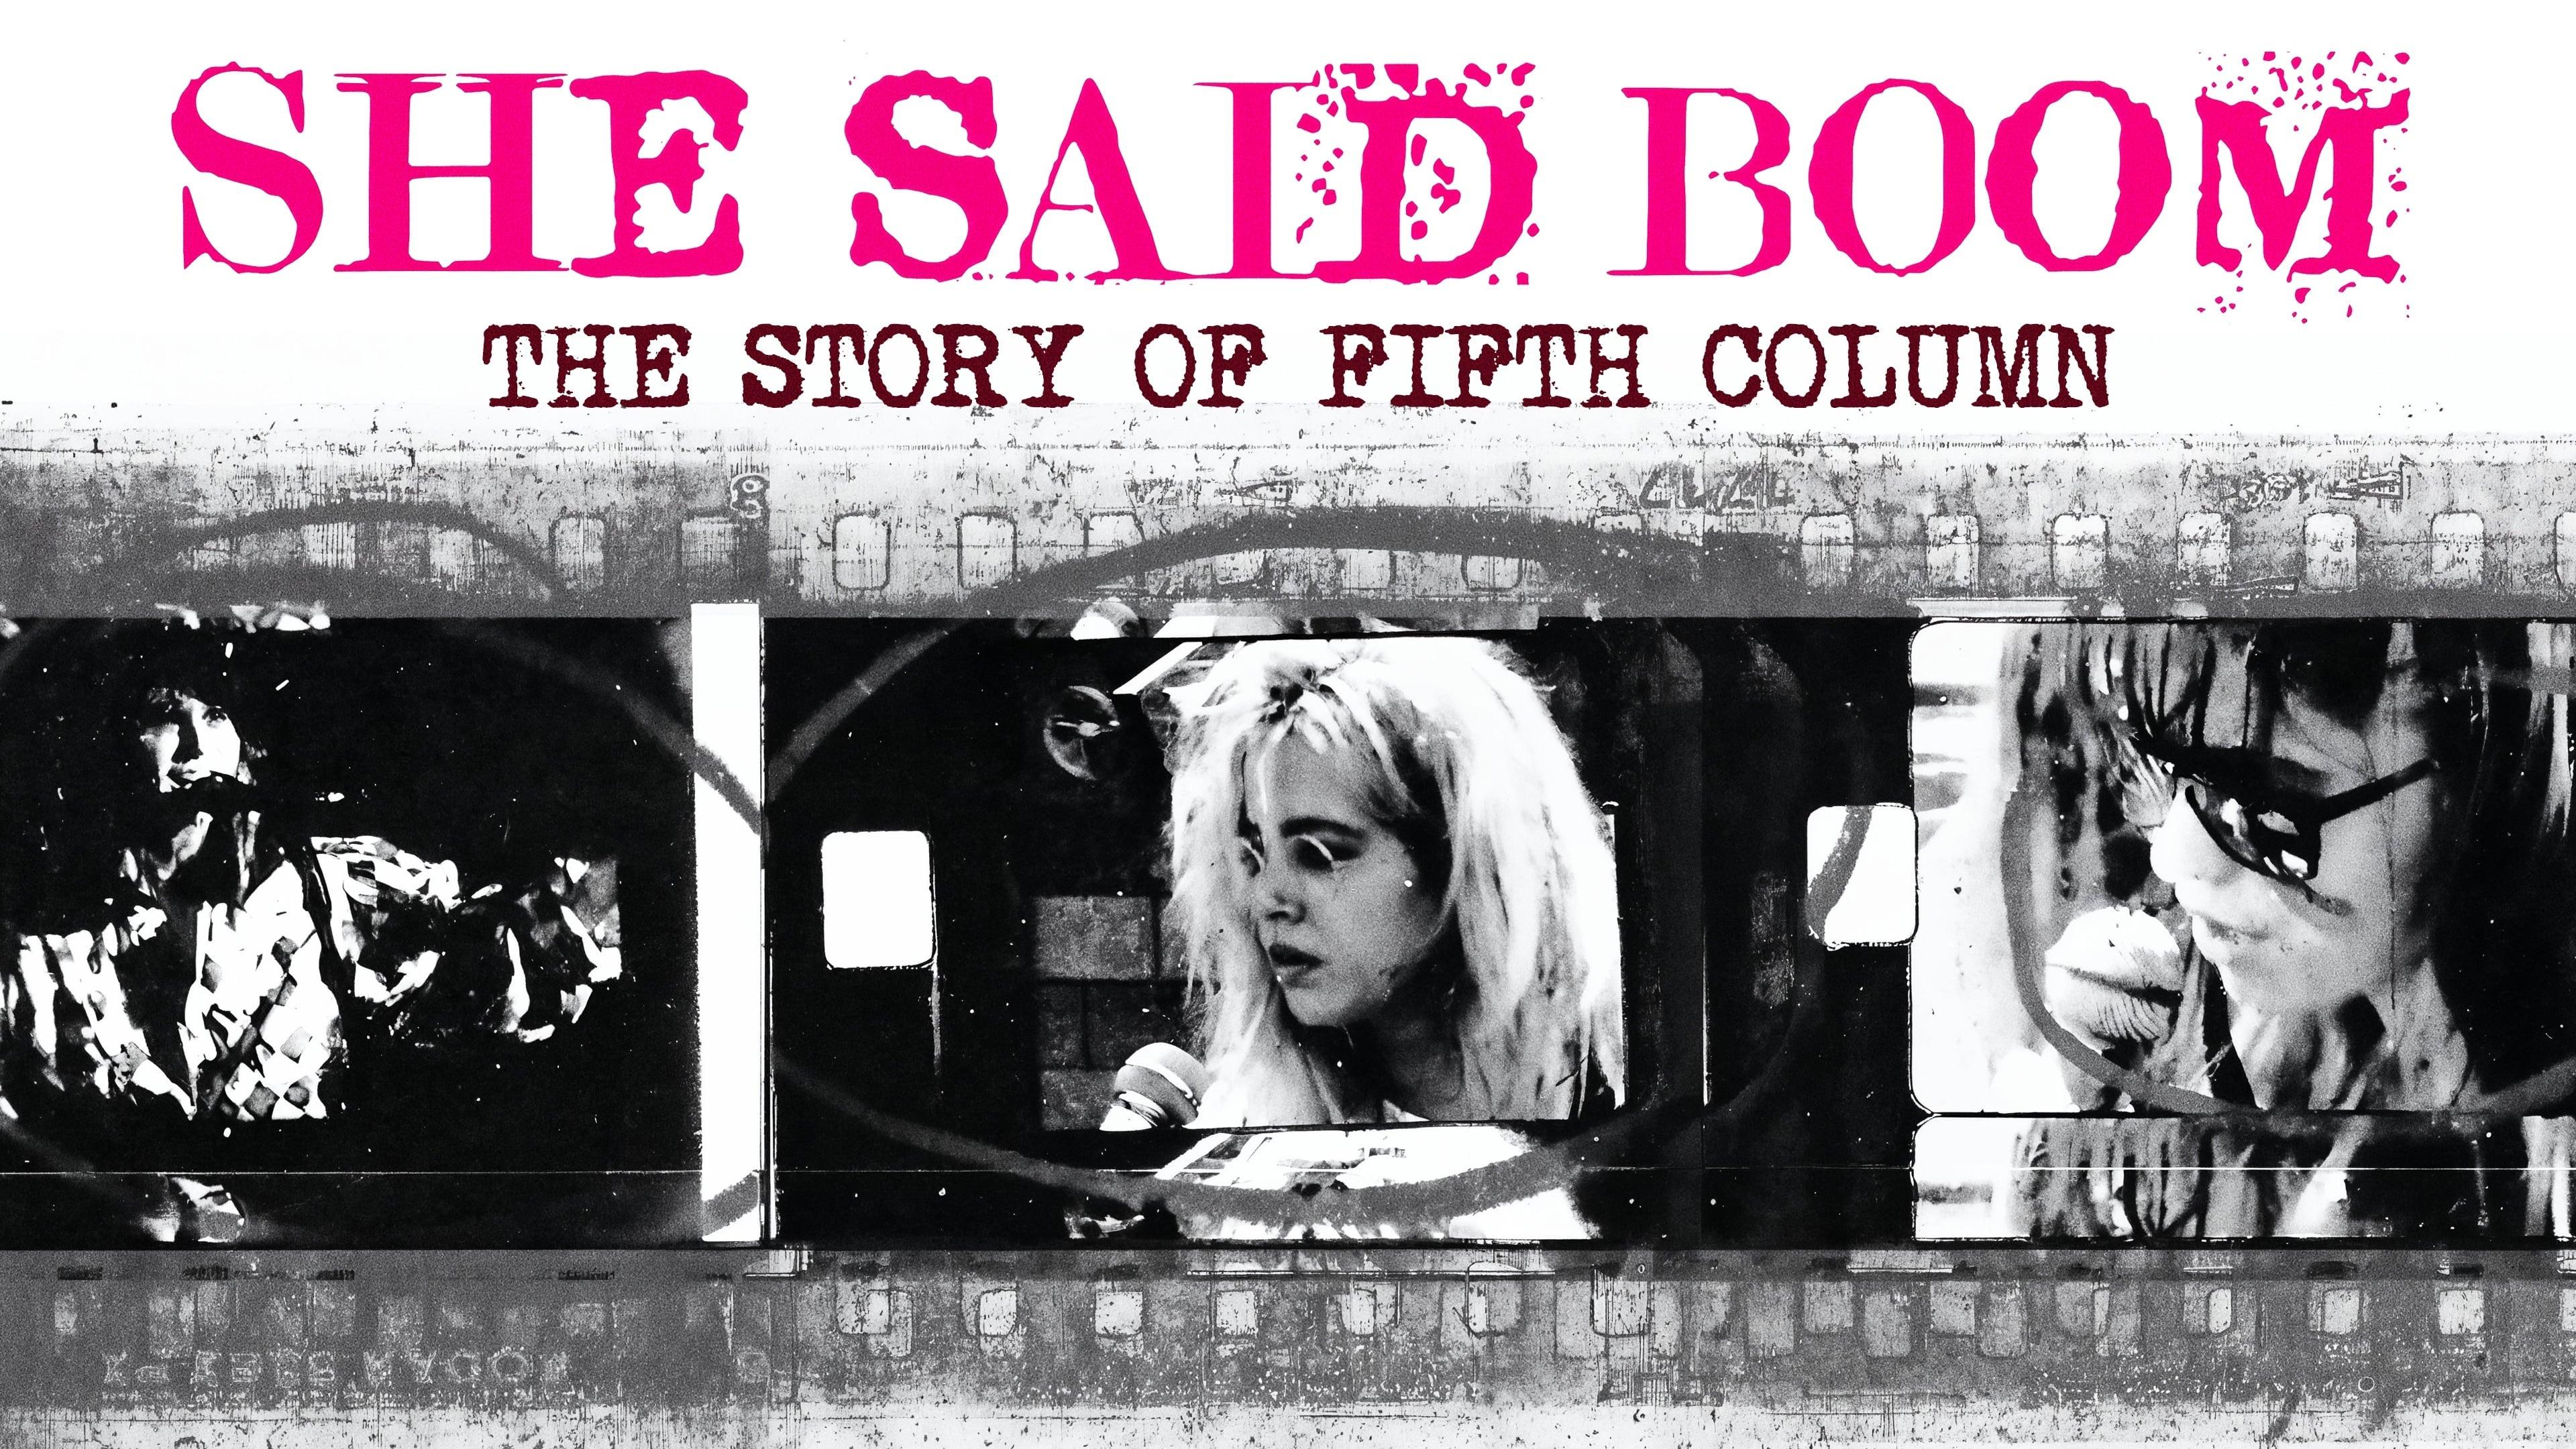 She Said Boom: The Story of Fifth Column backdrop